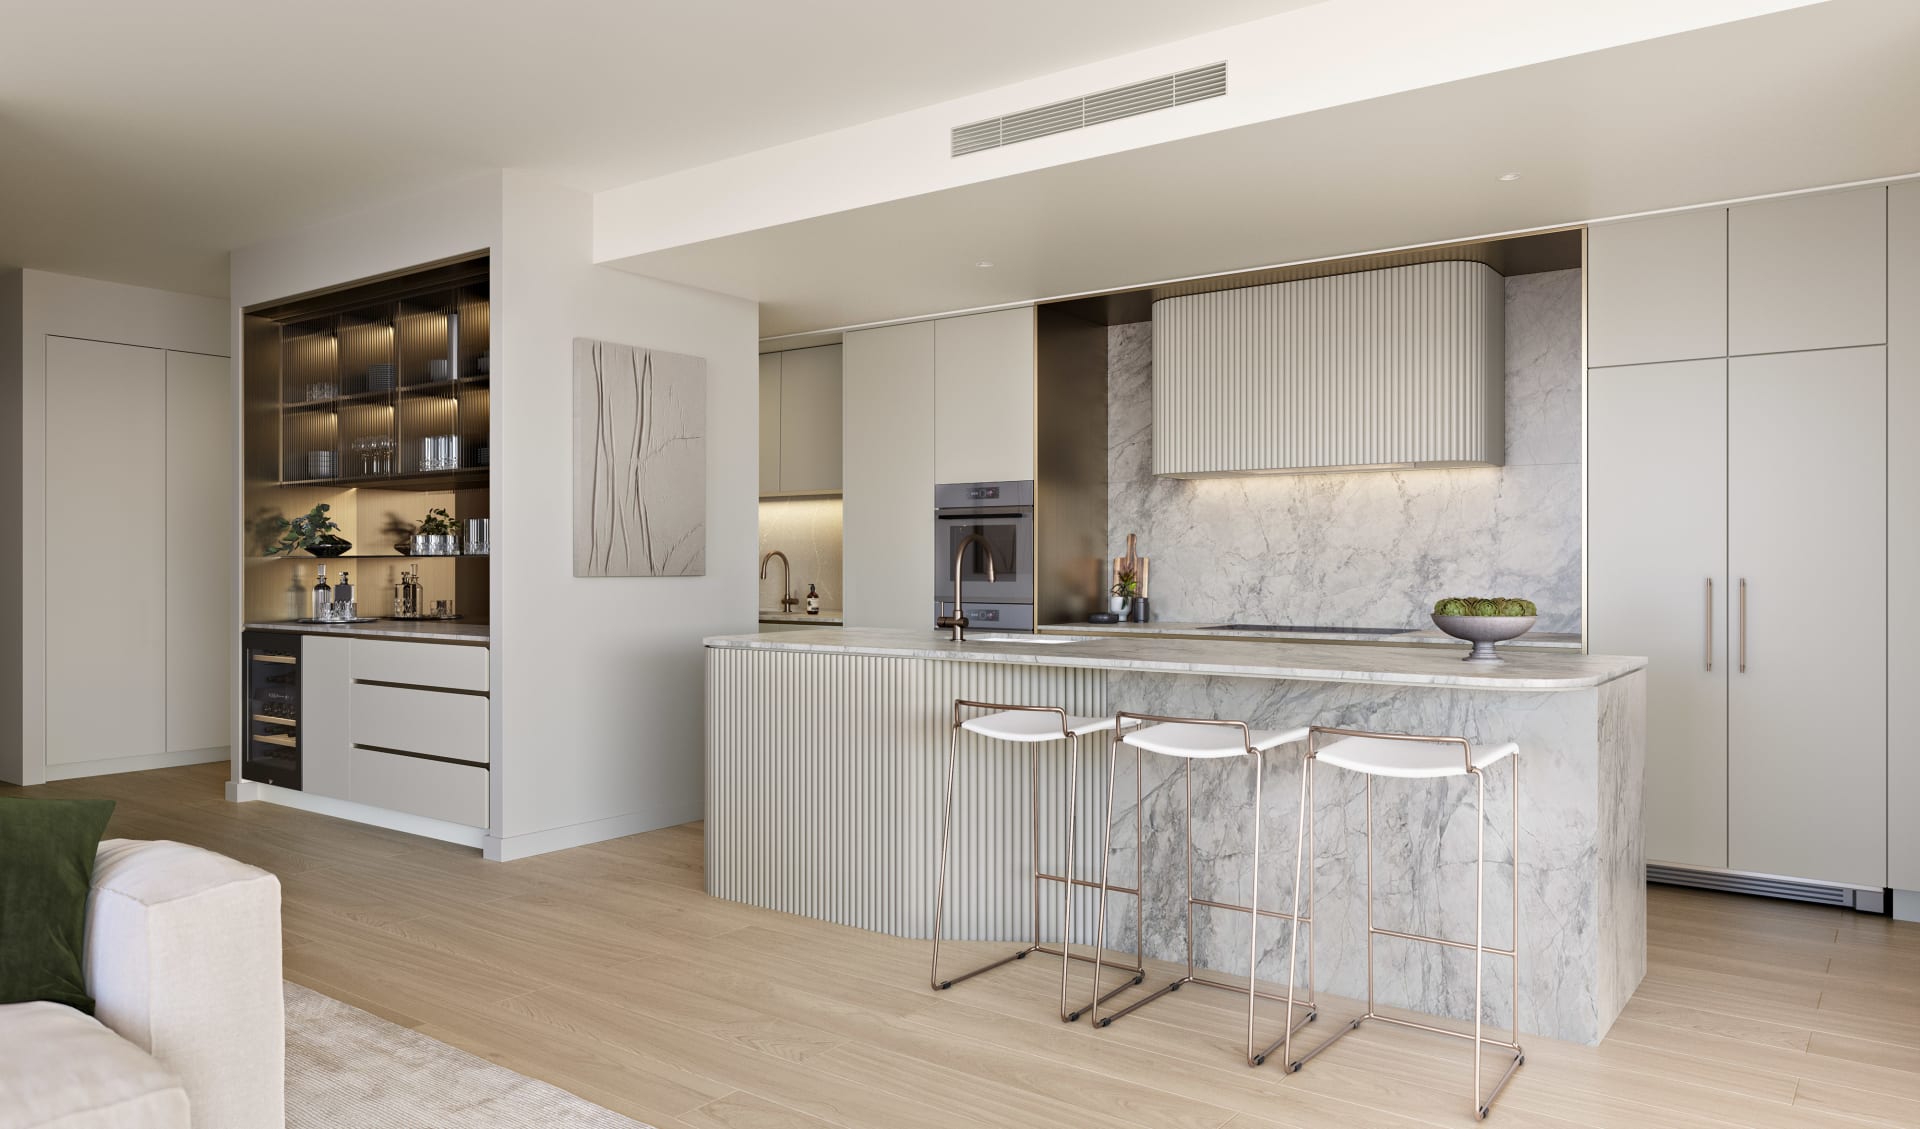 Hutchies begin build of Consolidated Property Group's Monarch Residences in Toowong